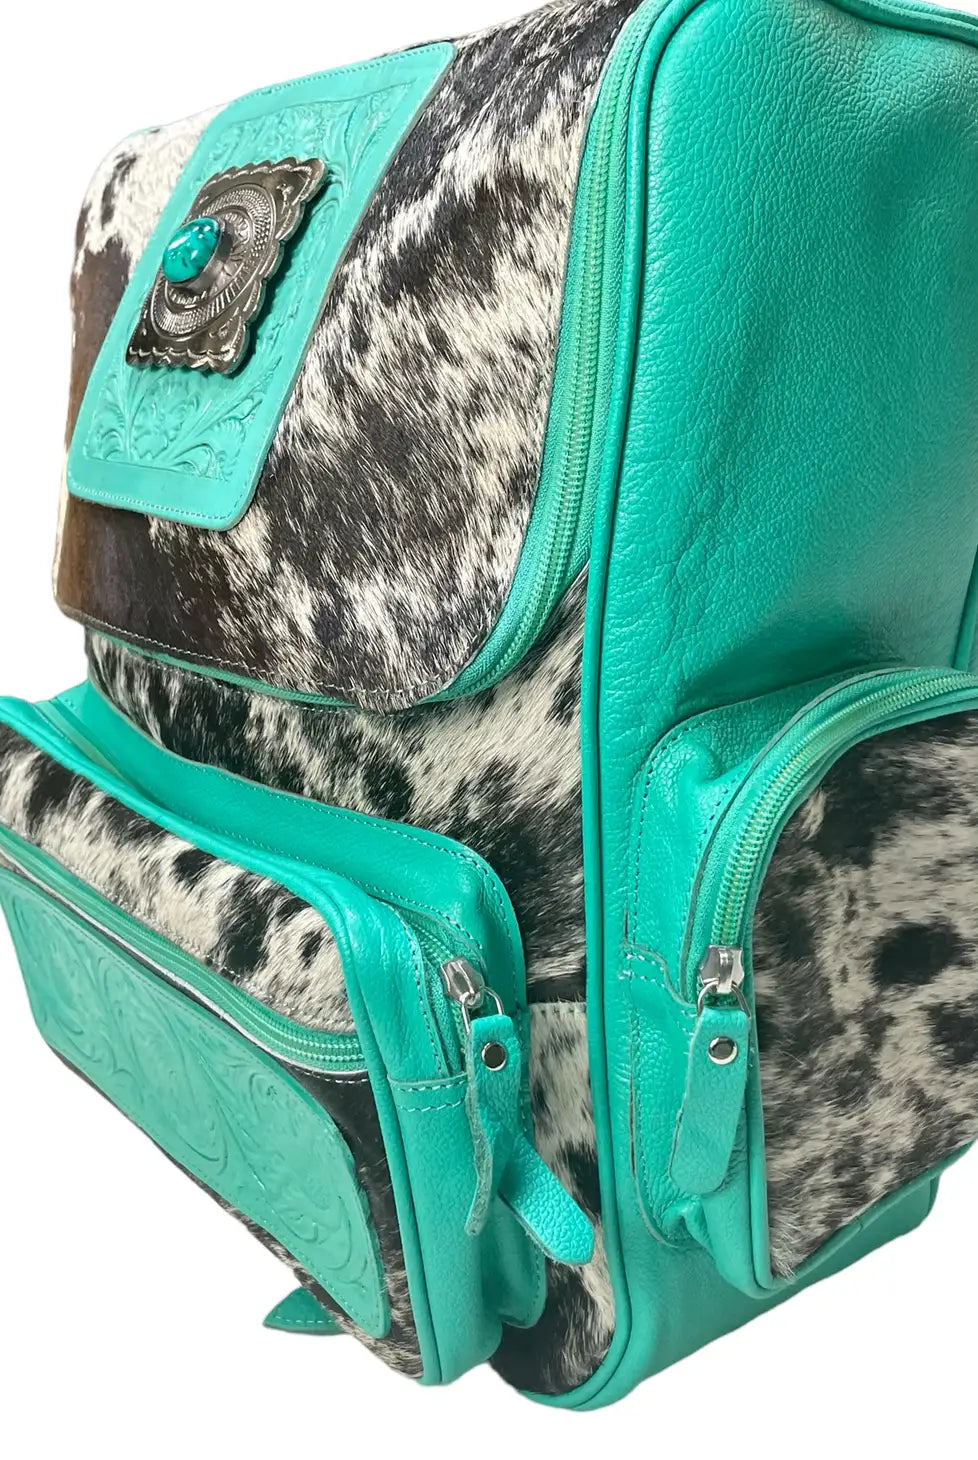 The Turquoise Concho Cowhide Backpack-Bags & Purses-Deadwood South Boutique & Company-Deadwood South Boutique, Women's Fashion Boutique in Henderson, TX